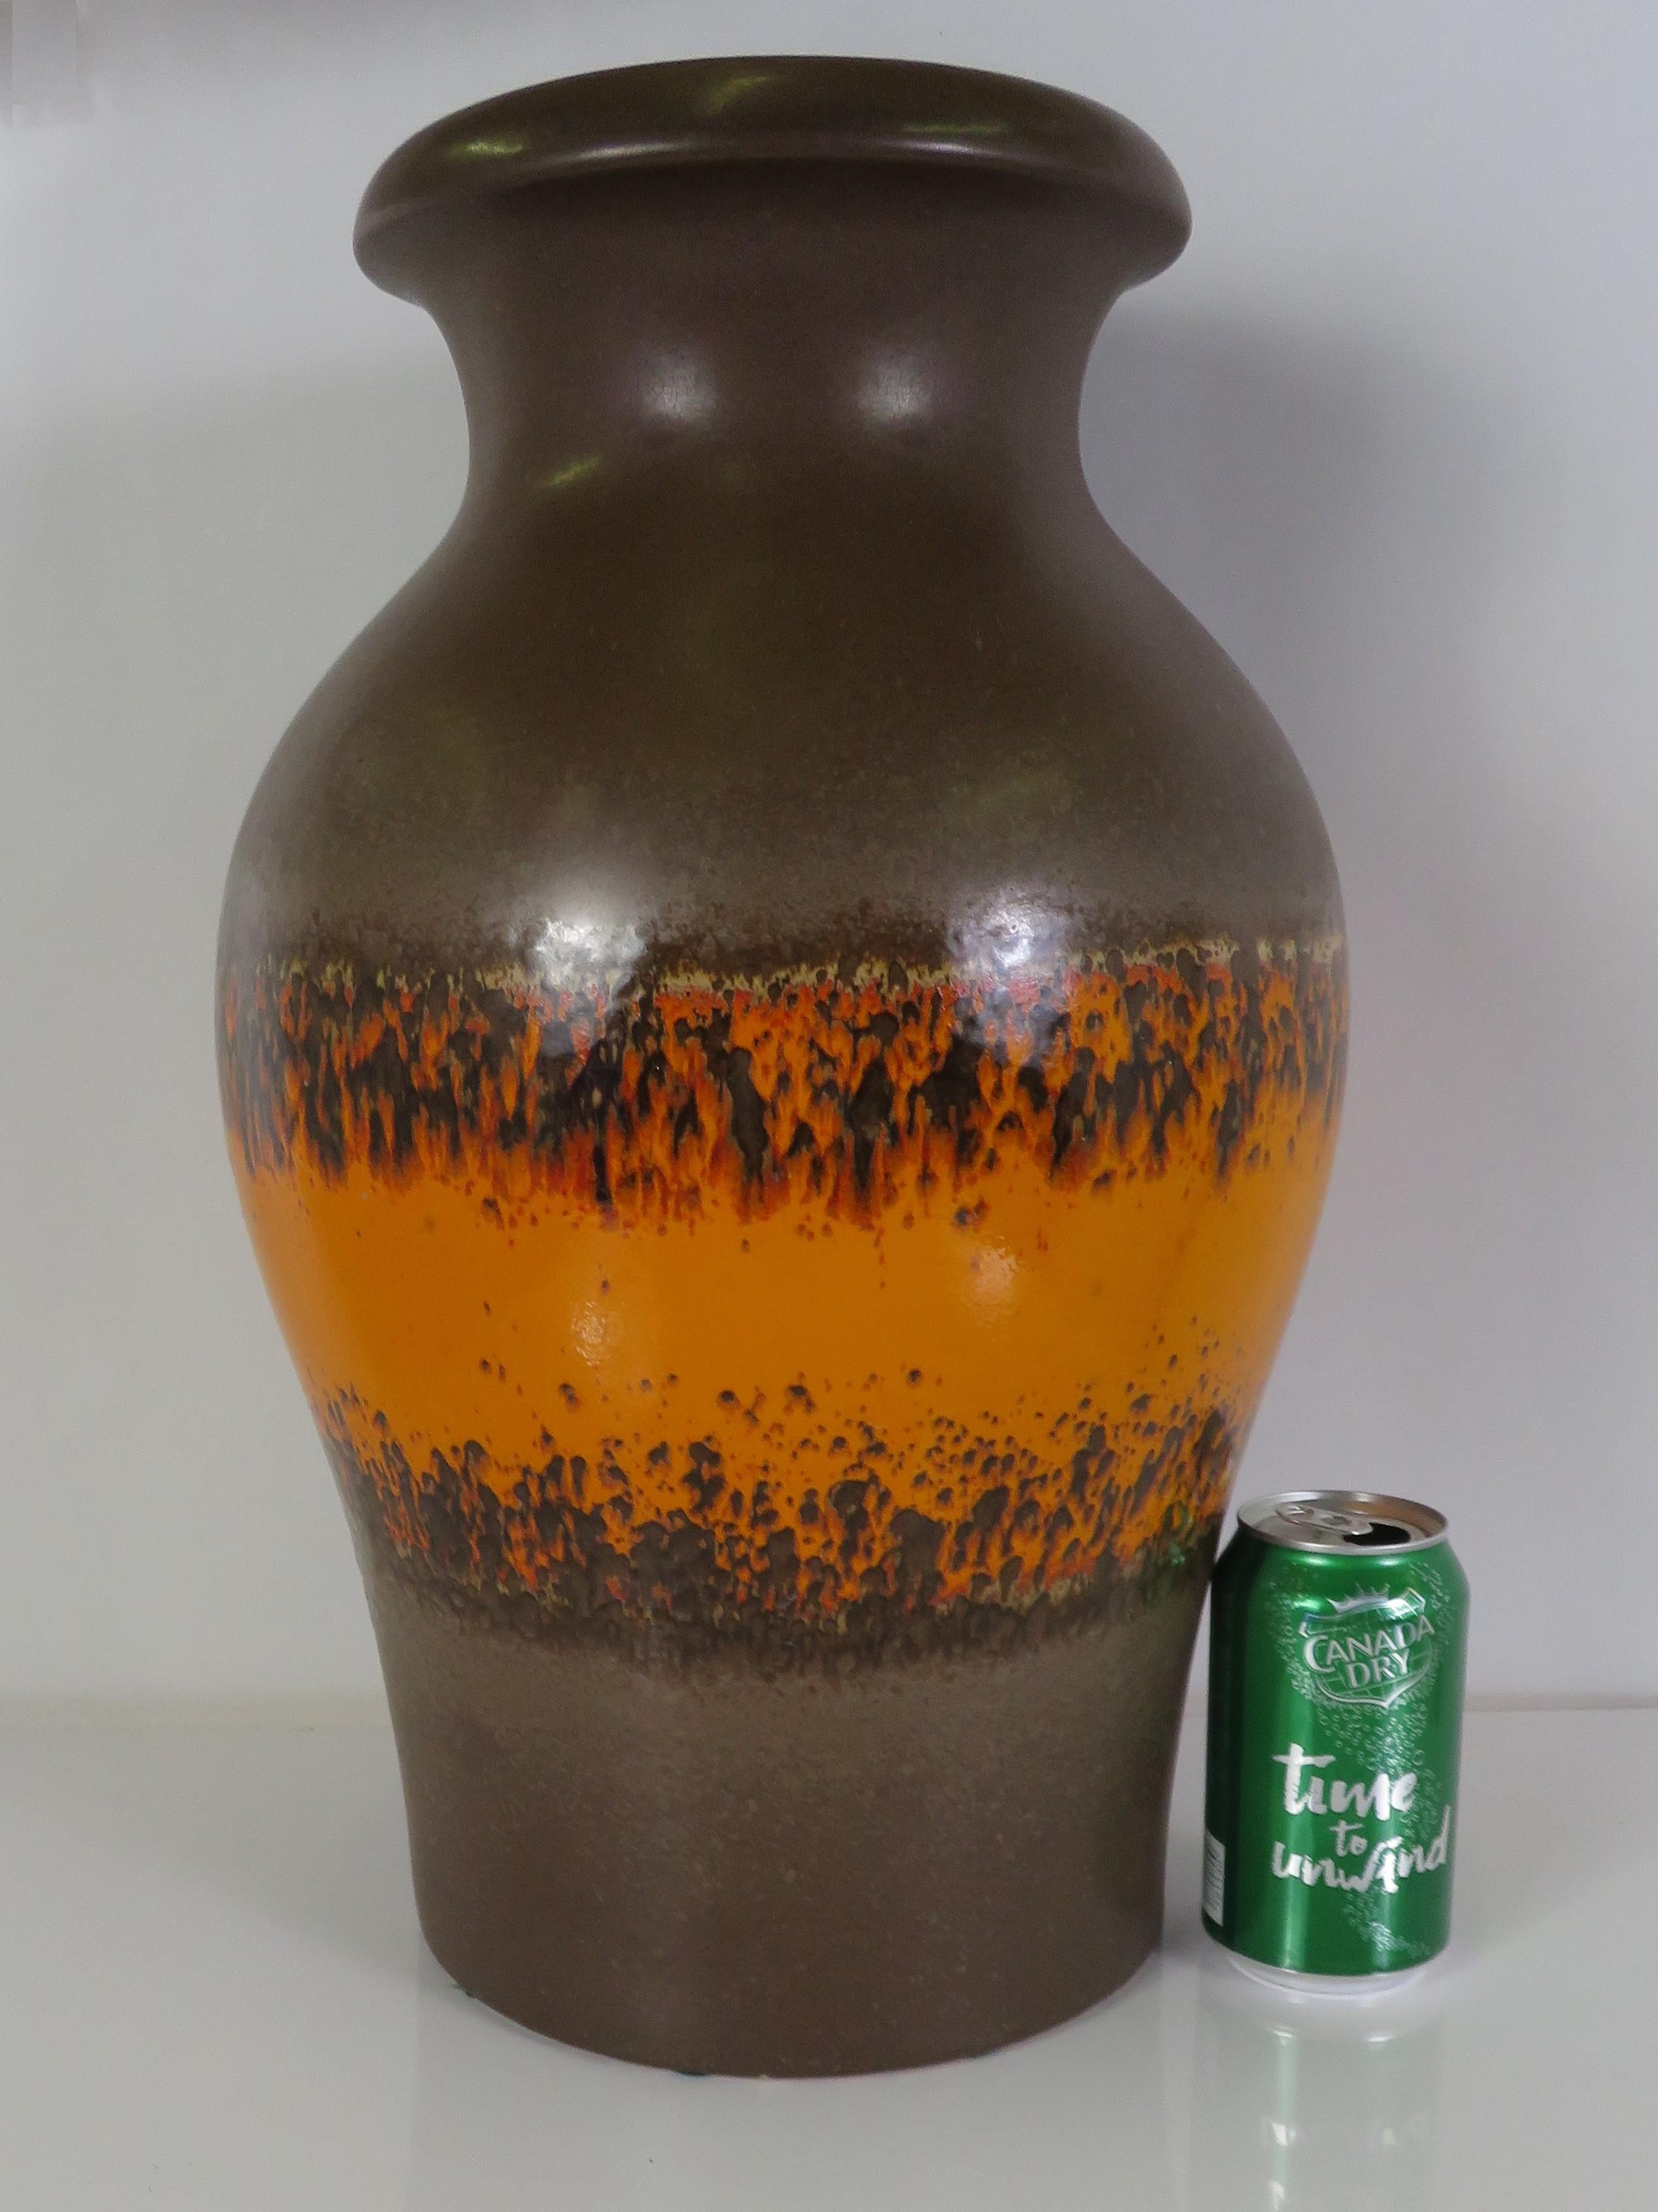 Large and impressive 1960s Mid-Century Modern German lava glaze pottery floor vase from Scheurich pottery. Fat and appealing shape, at once masculine and strong. Designed with an orange lava band on the center on a dark cholate background, the